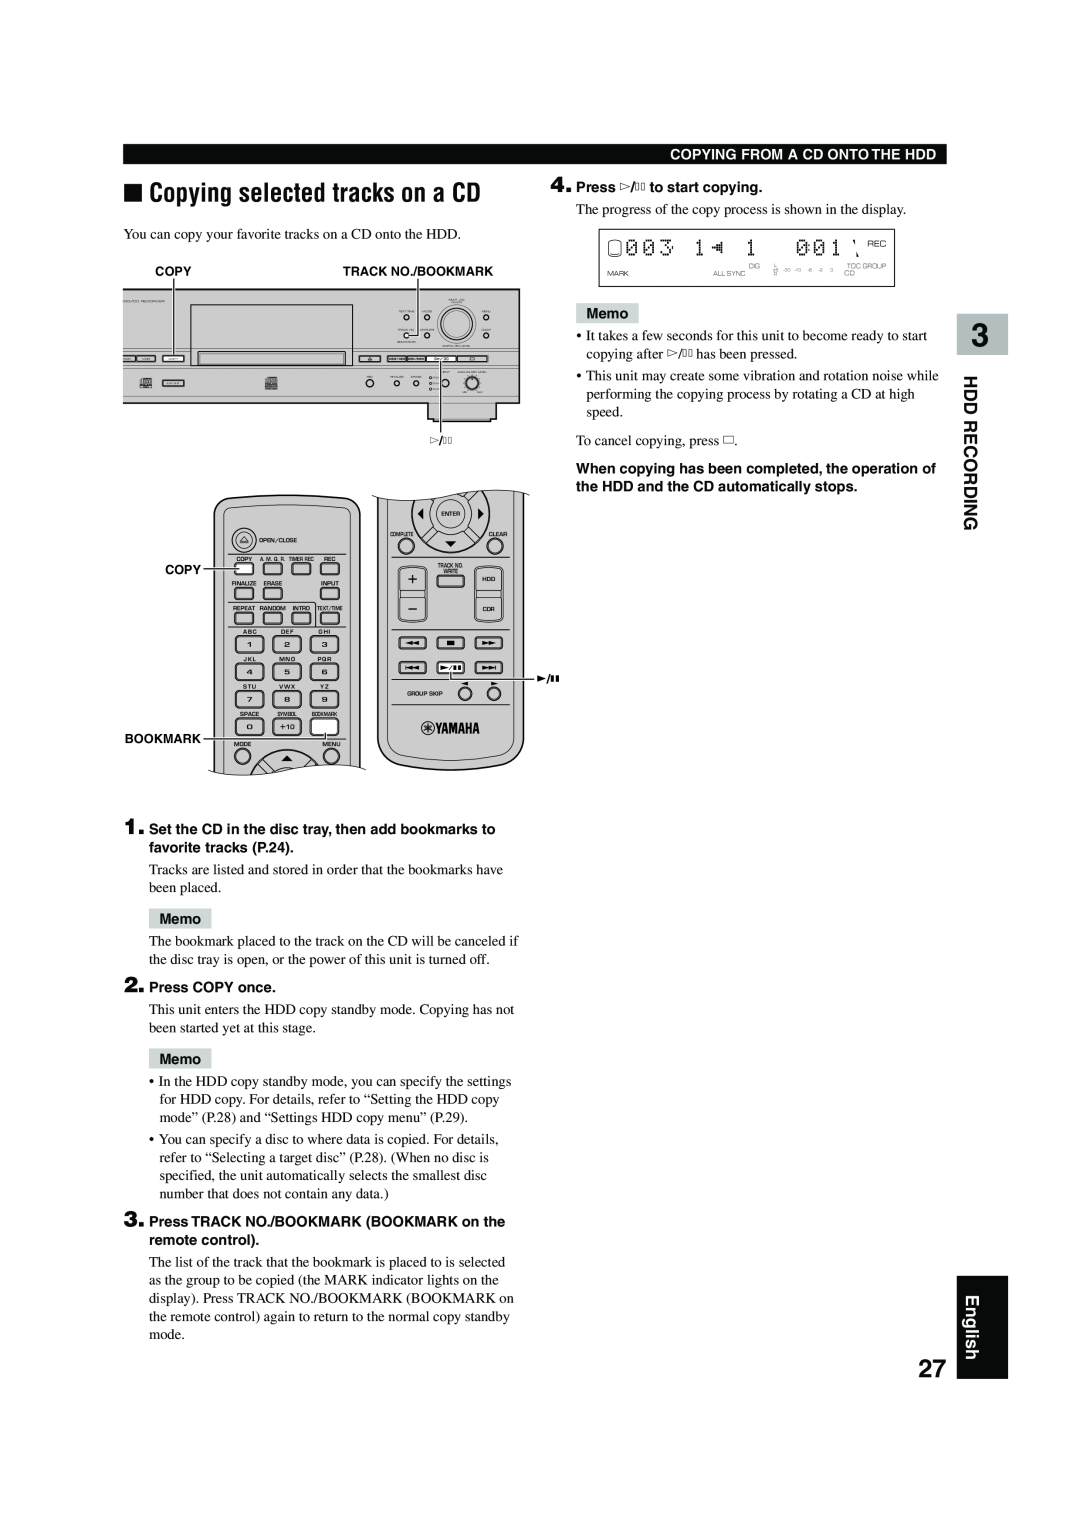 Yamaha CDR-HD 1500 owner manual Copying selected tracks on a CD, English, Hdd Recording, Copying From A Cd Onto The Hdd 